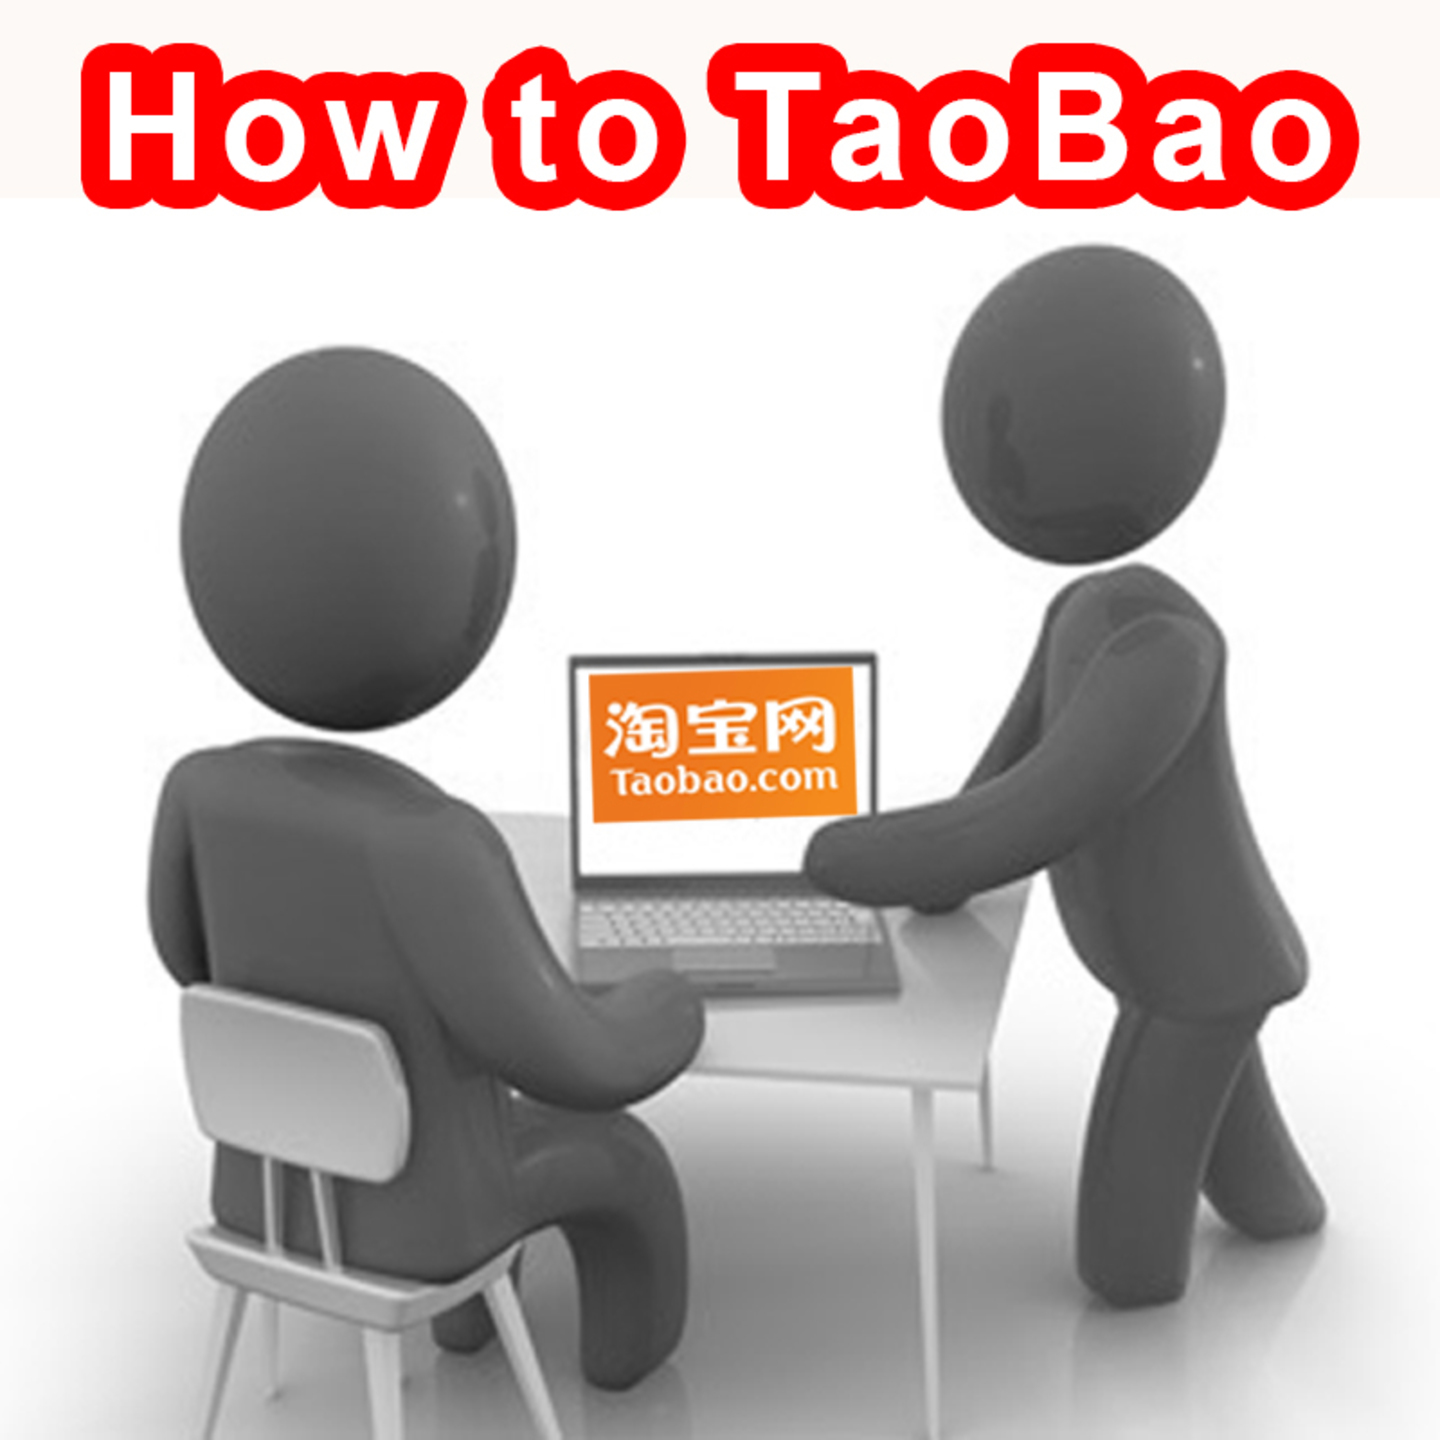 Taobao shopping  Face to face training  How to shop on TAOBAO  Create account